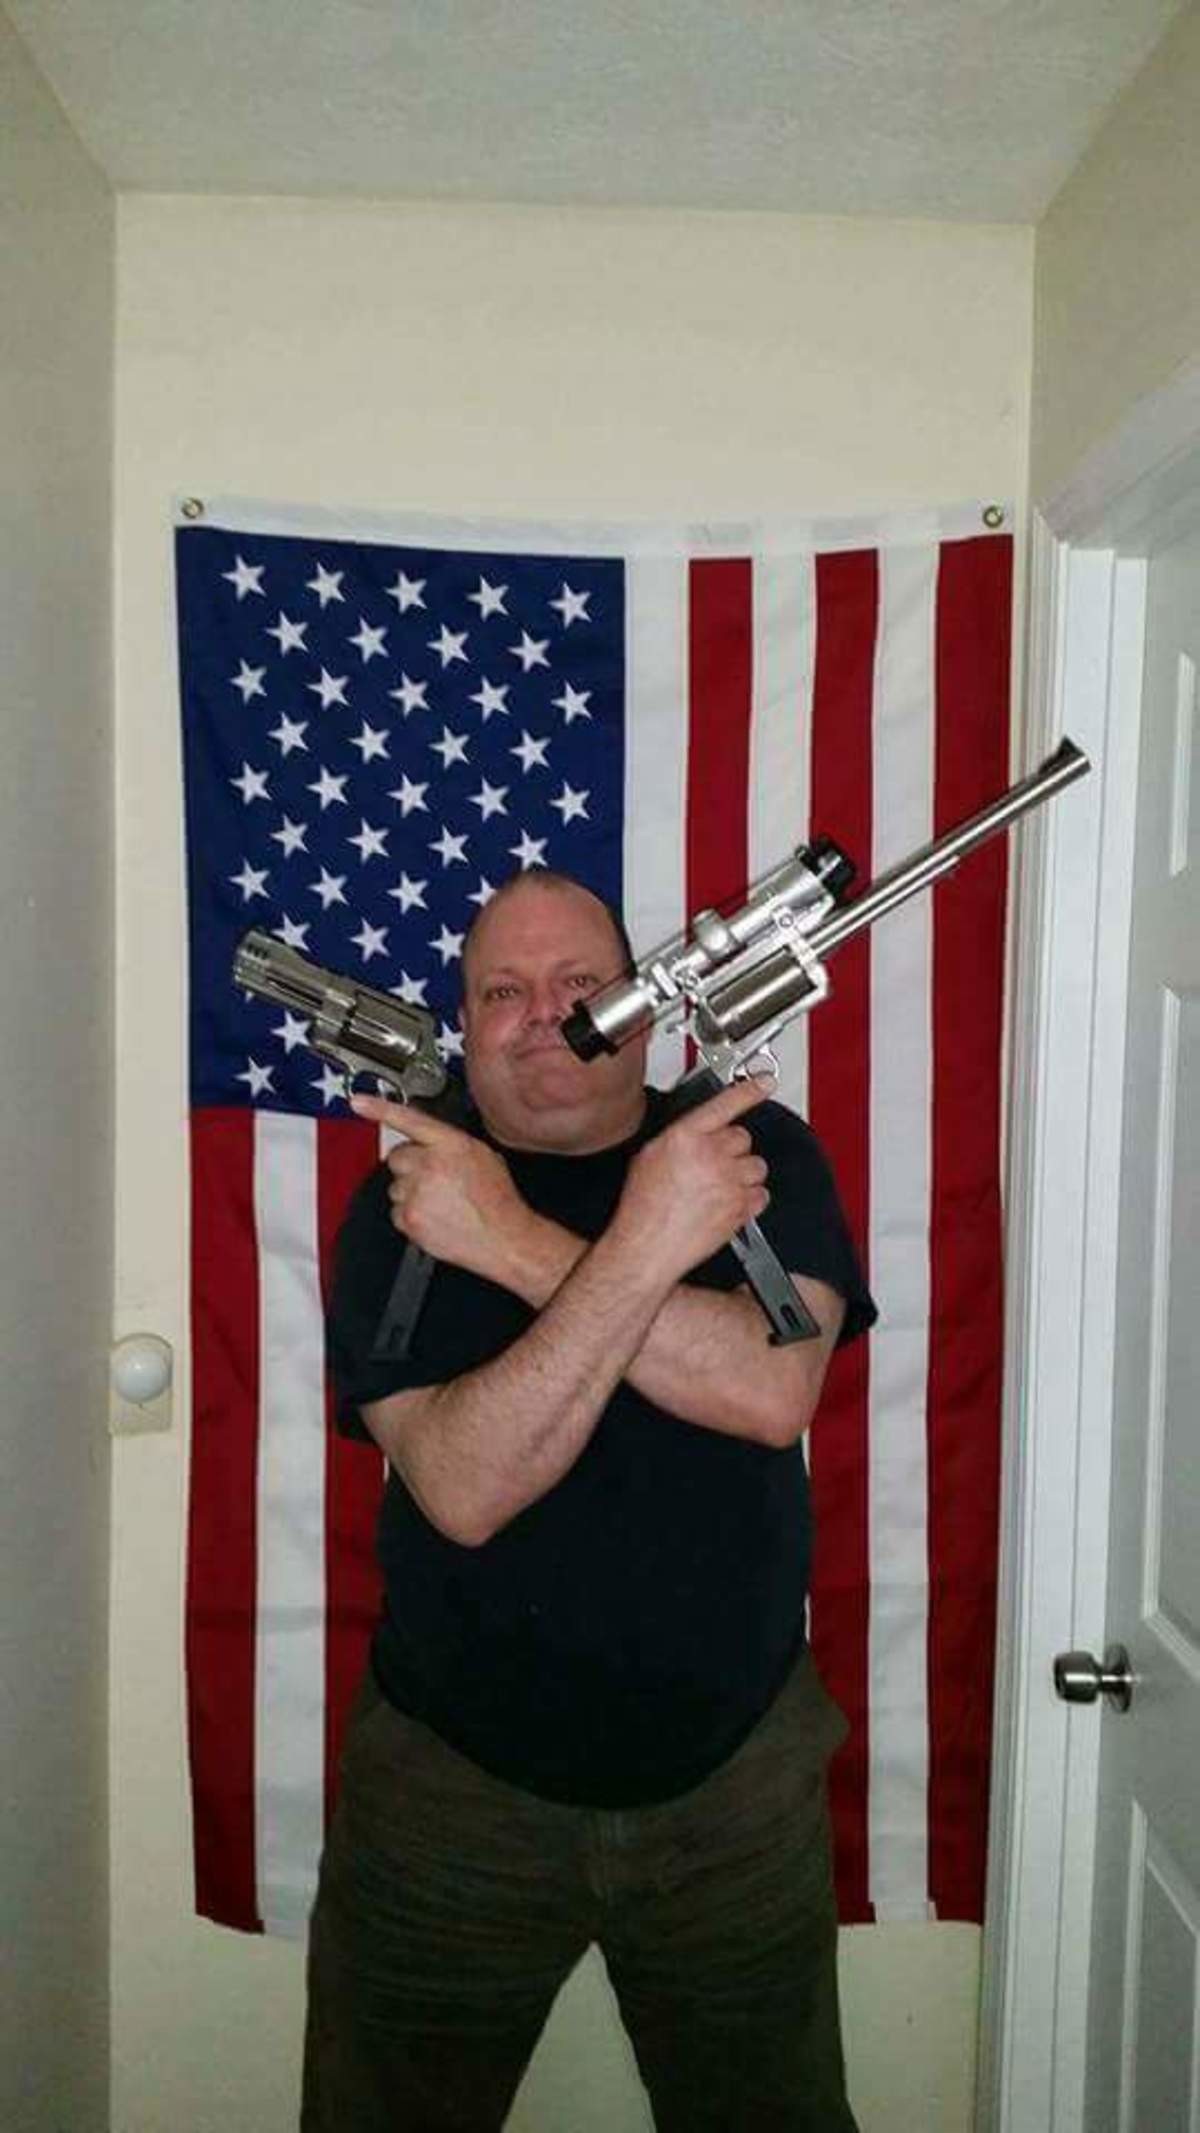 healthy oafish Snake. join list: Gavncomps (1266 subs)Mention History.. Didn't this guy start this trend? Like he was tryin' to act thug, but everyone mocked him cause he was holding a mag on a revolver